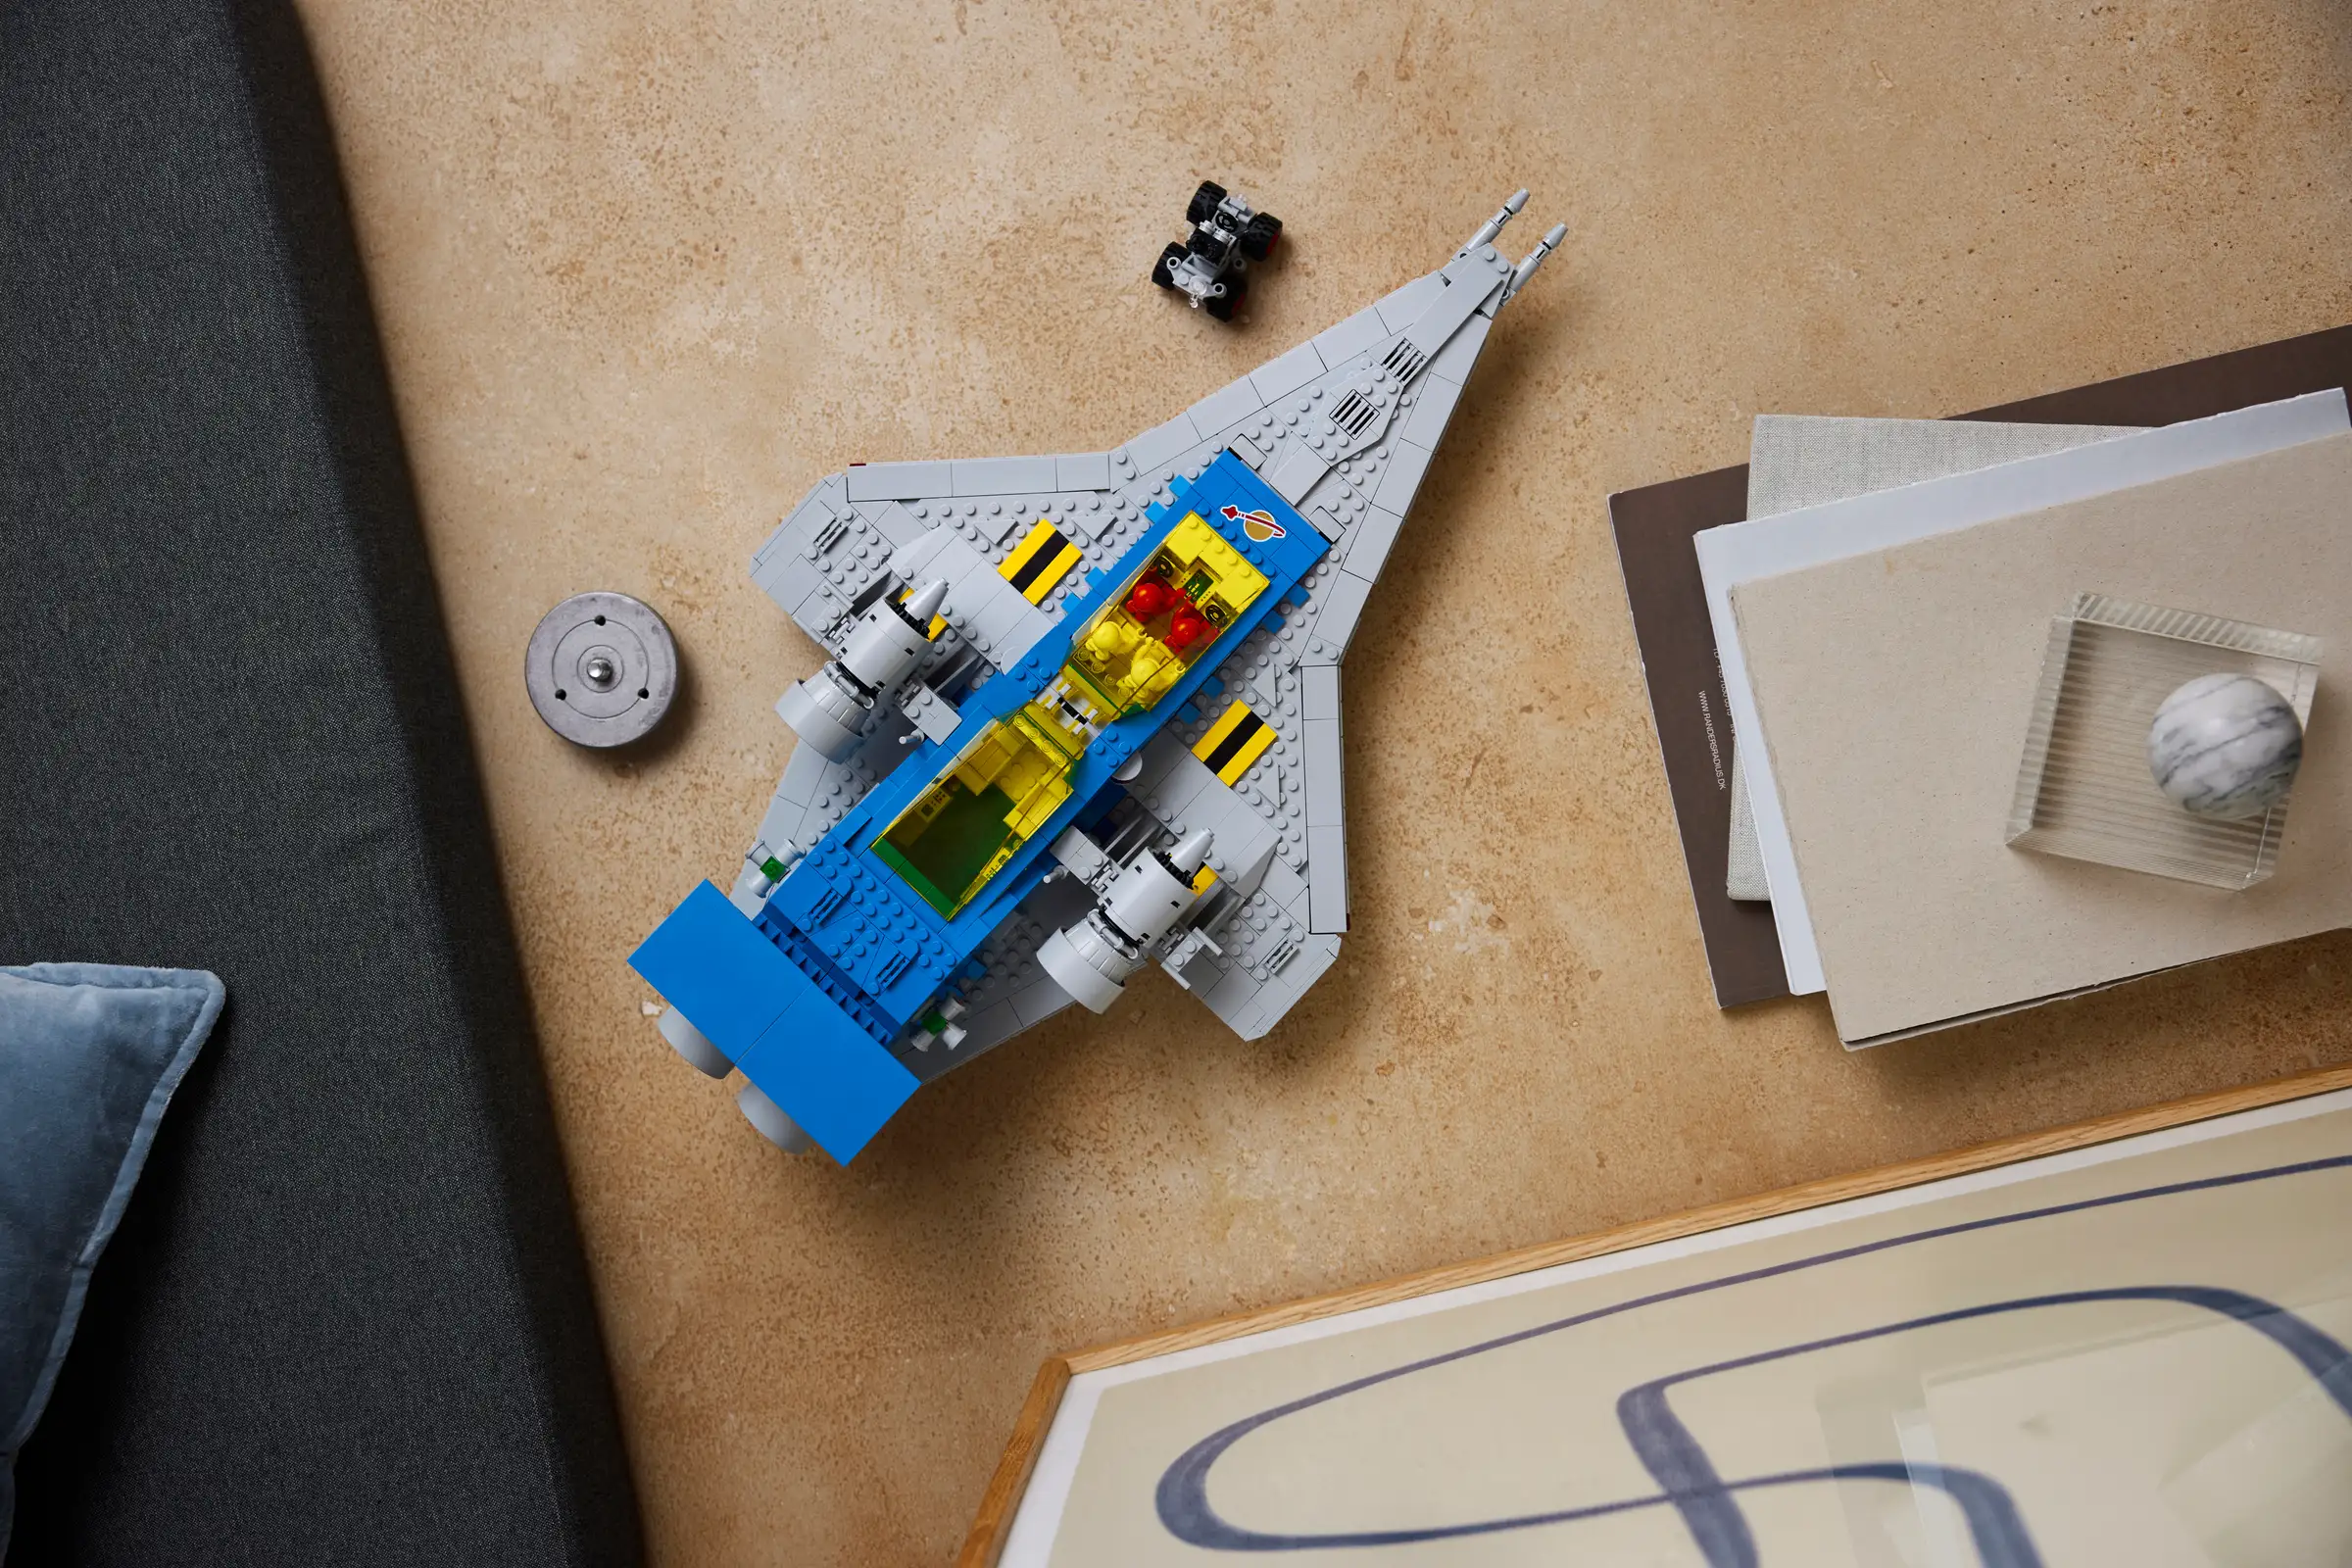 The New LEGO Space Galaxy Explorer!